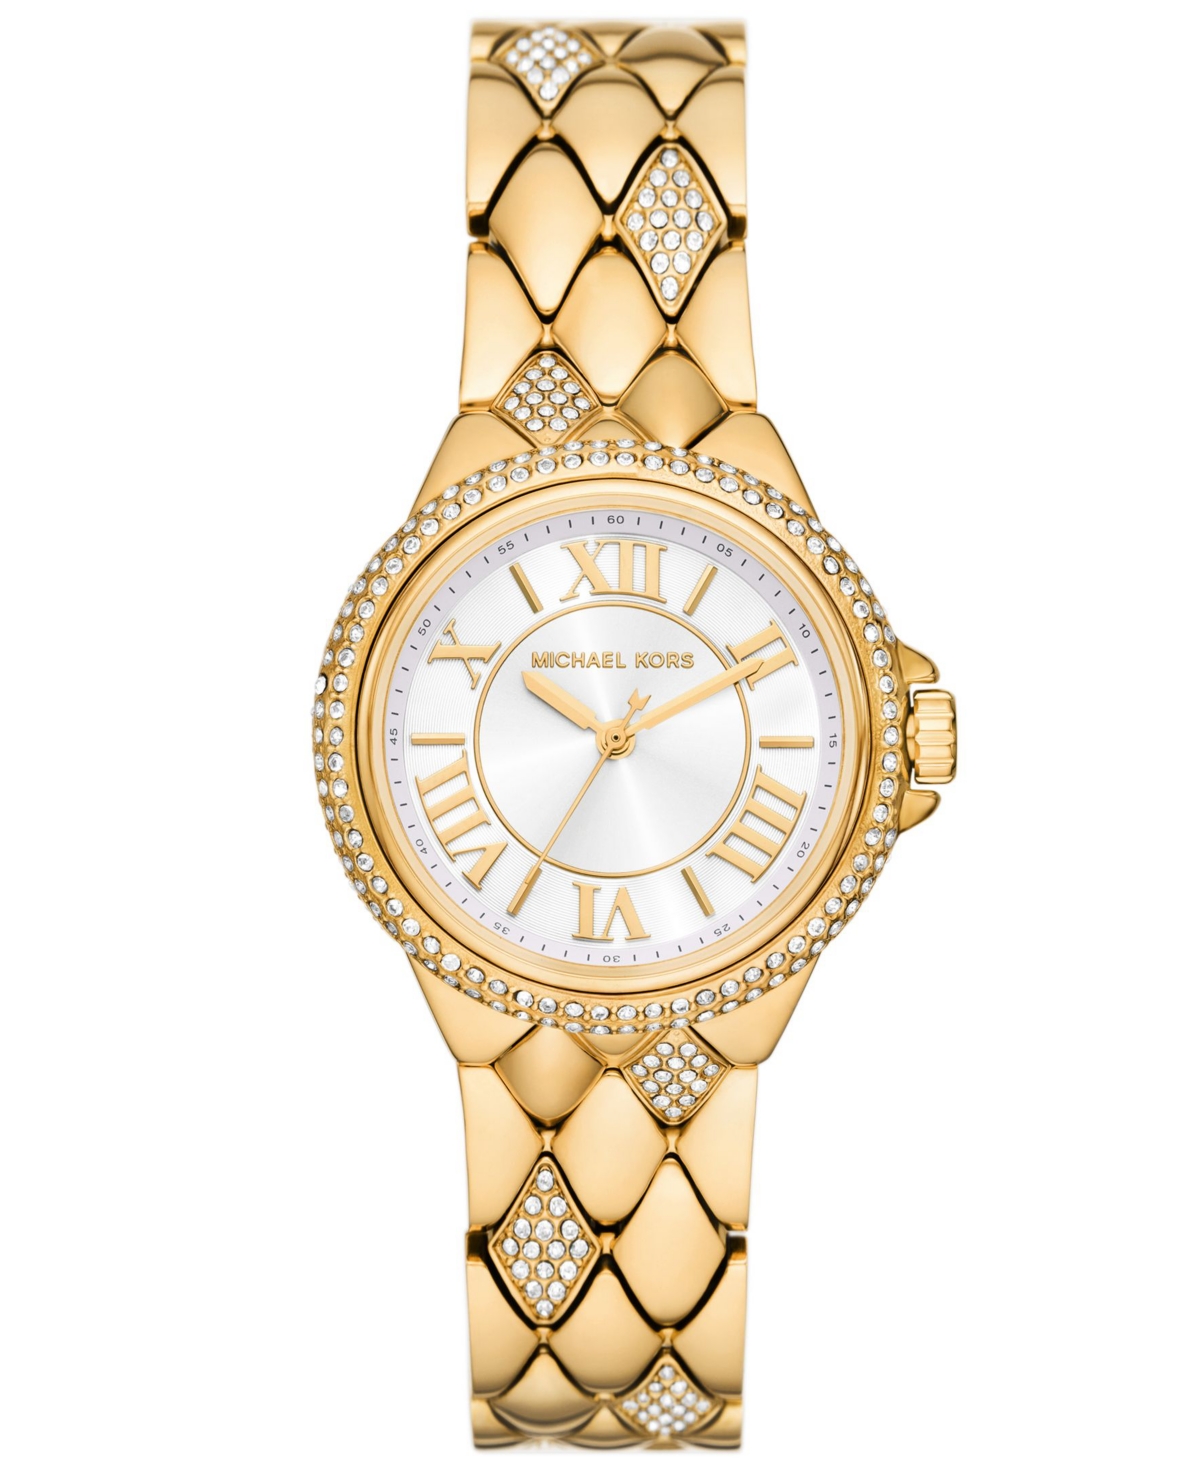 Michael Kors Women's Camille Three-hand Gold-tone Stainless Steel Watch 33mm